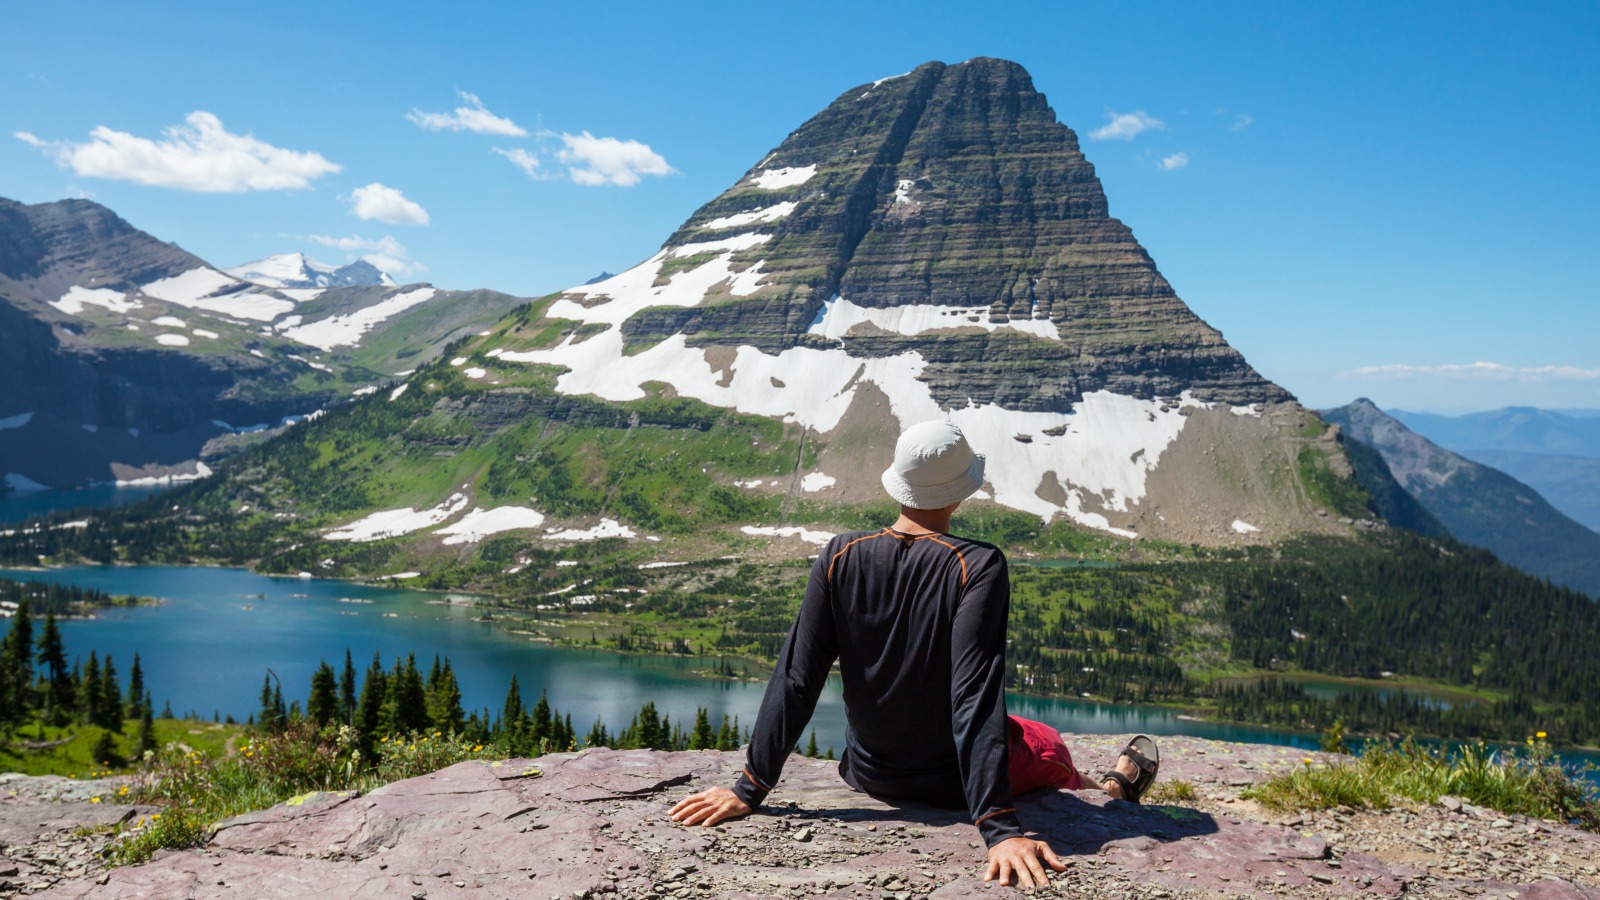 Glacier National Park used to have 150 glaciers. Now it has 26. Grist